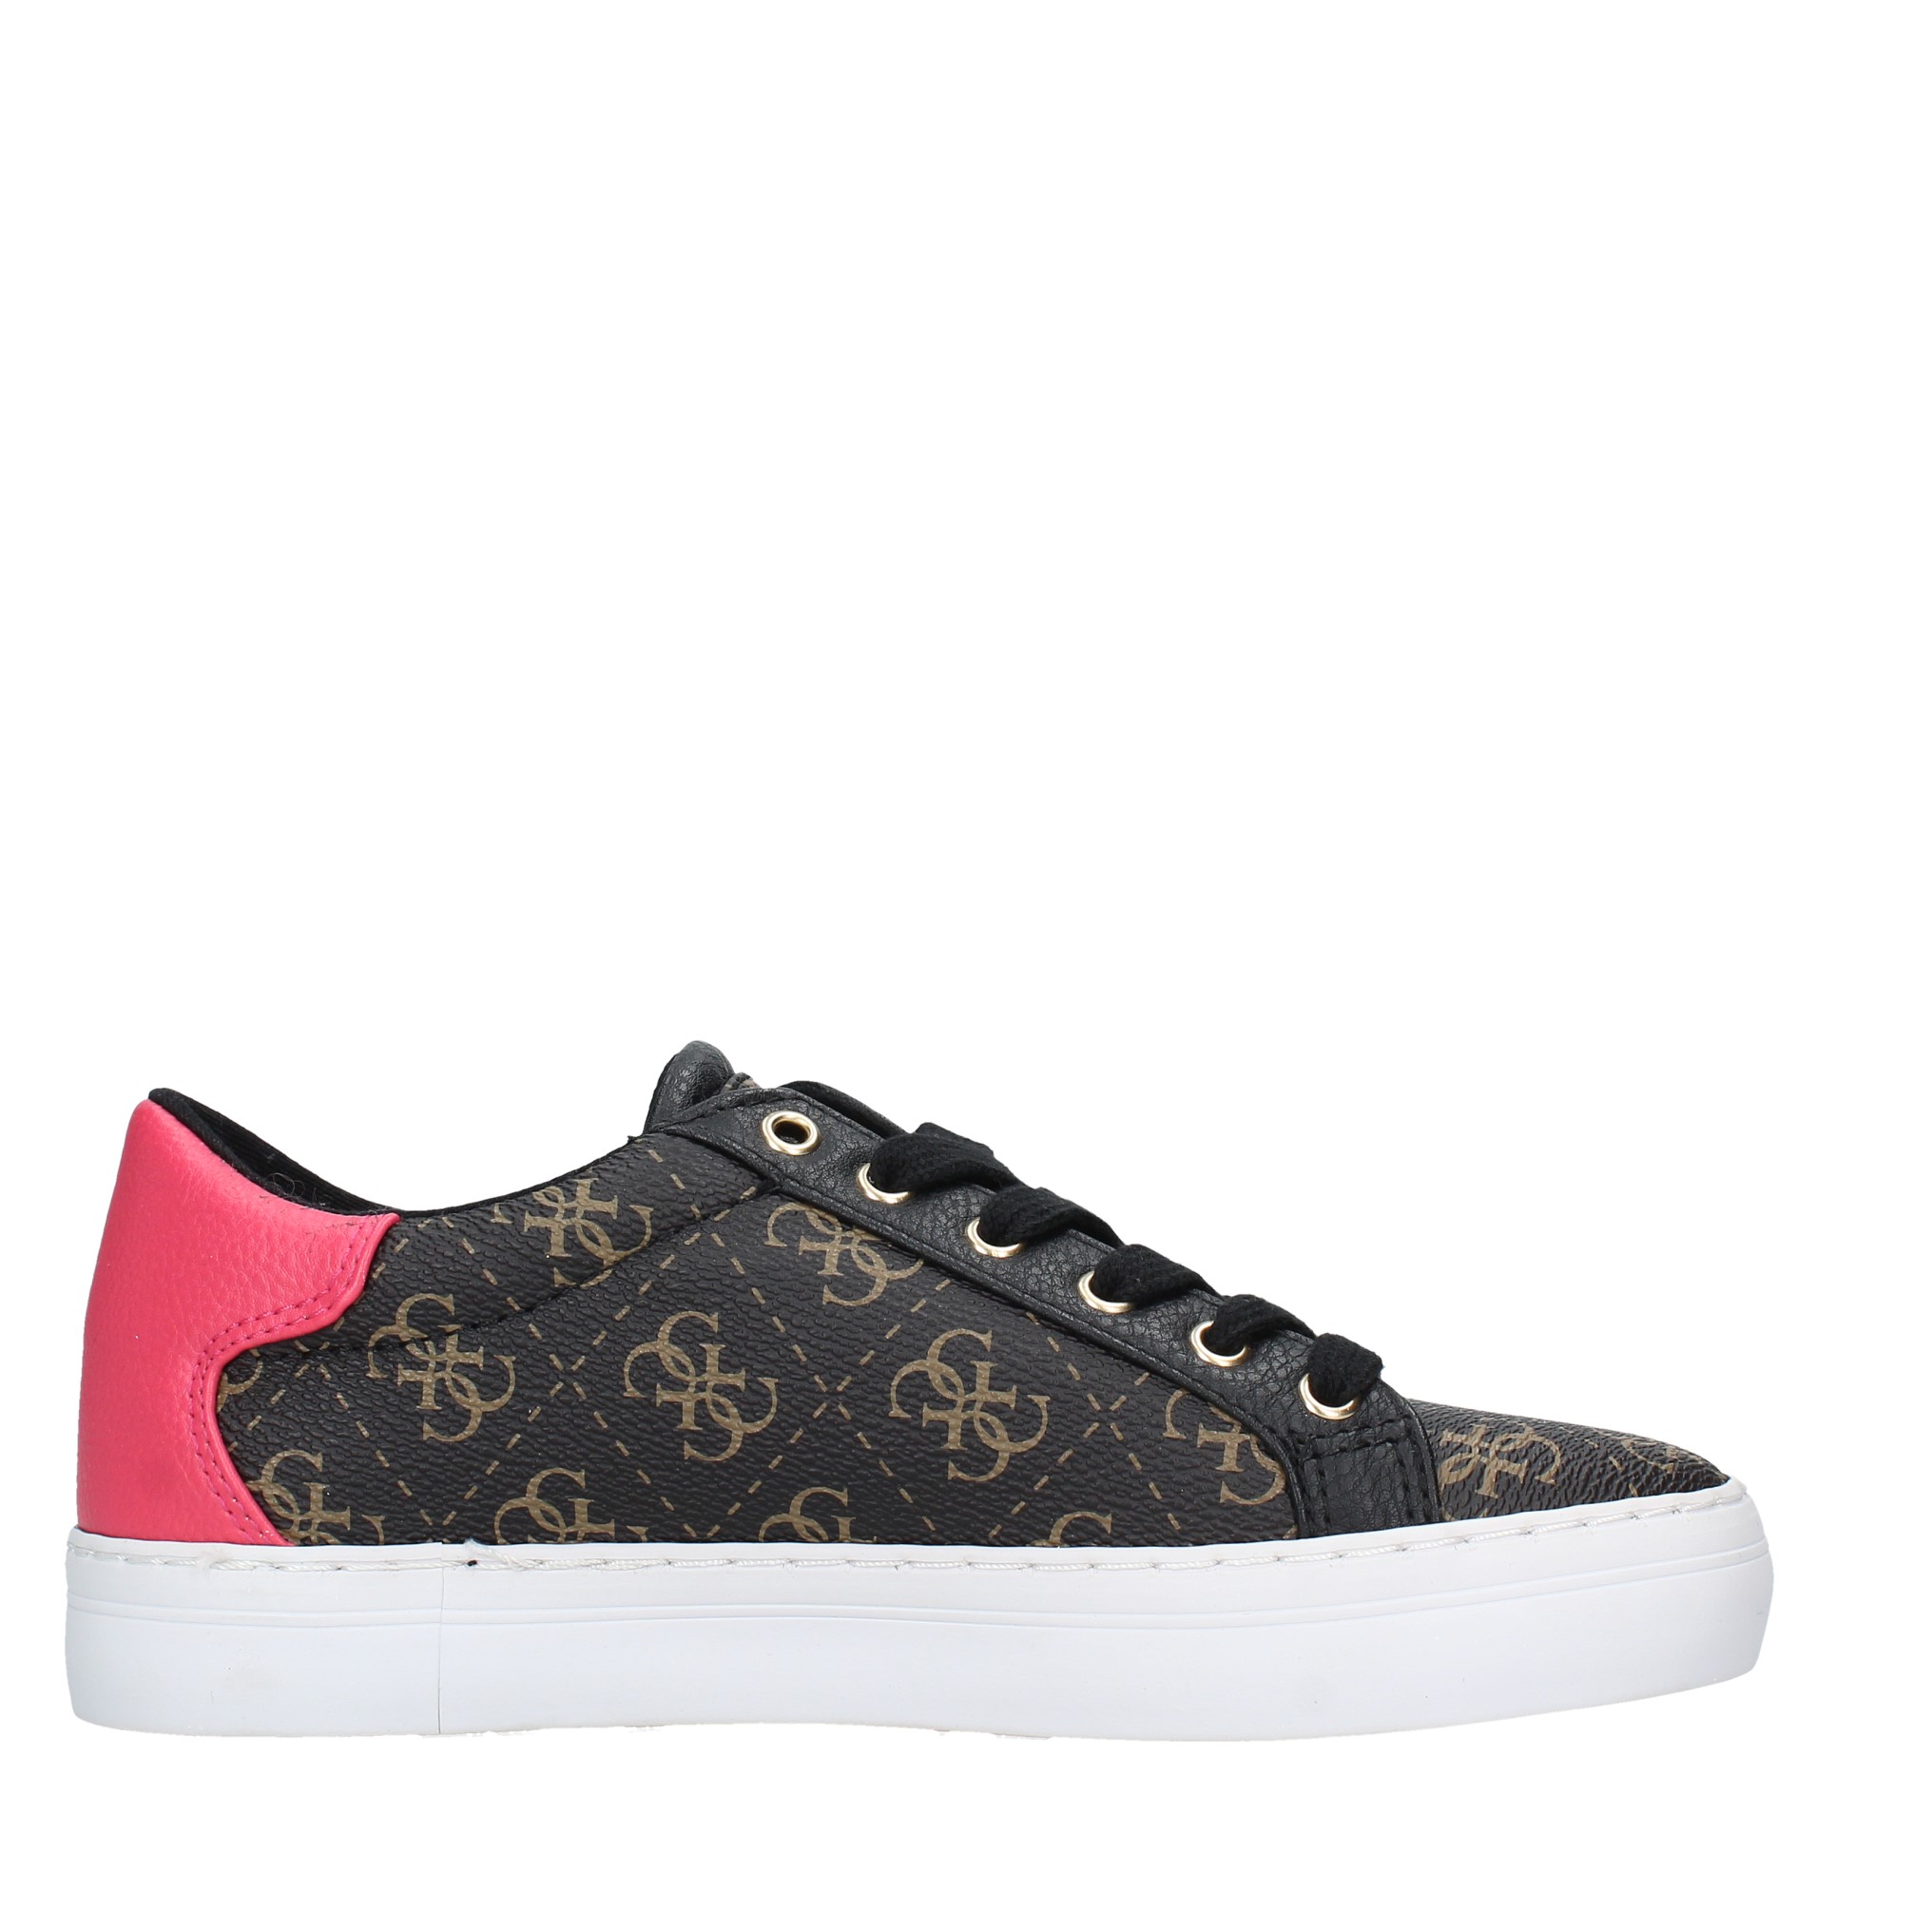 sneakers guess - GUESS - Ginevra calzature